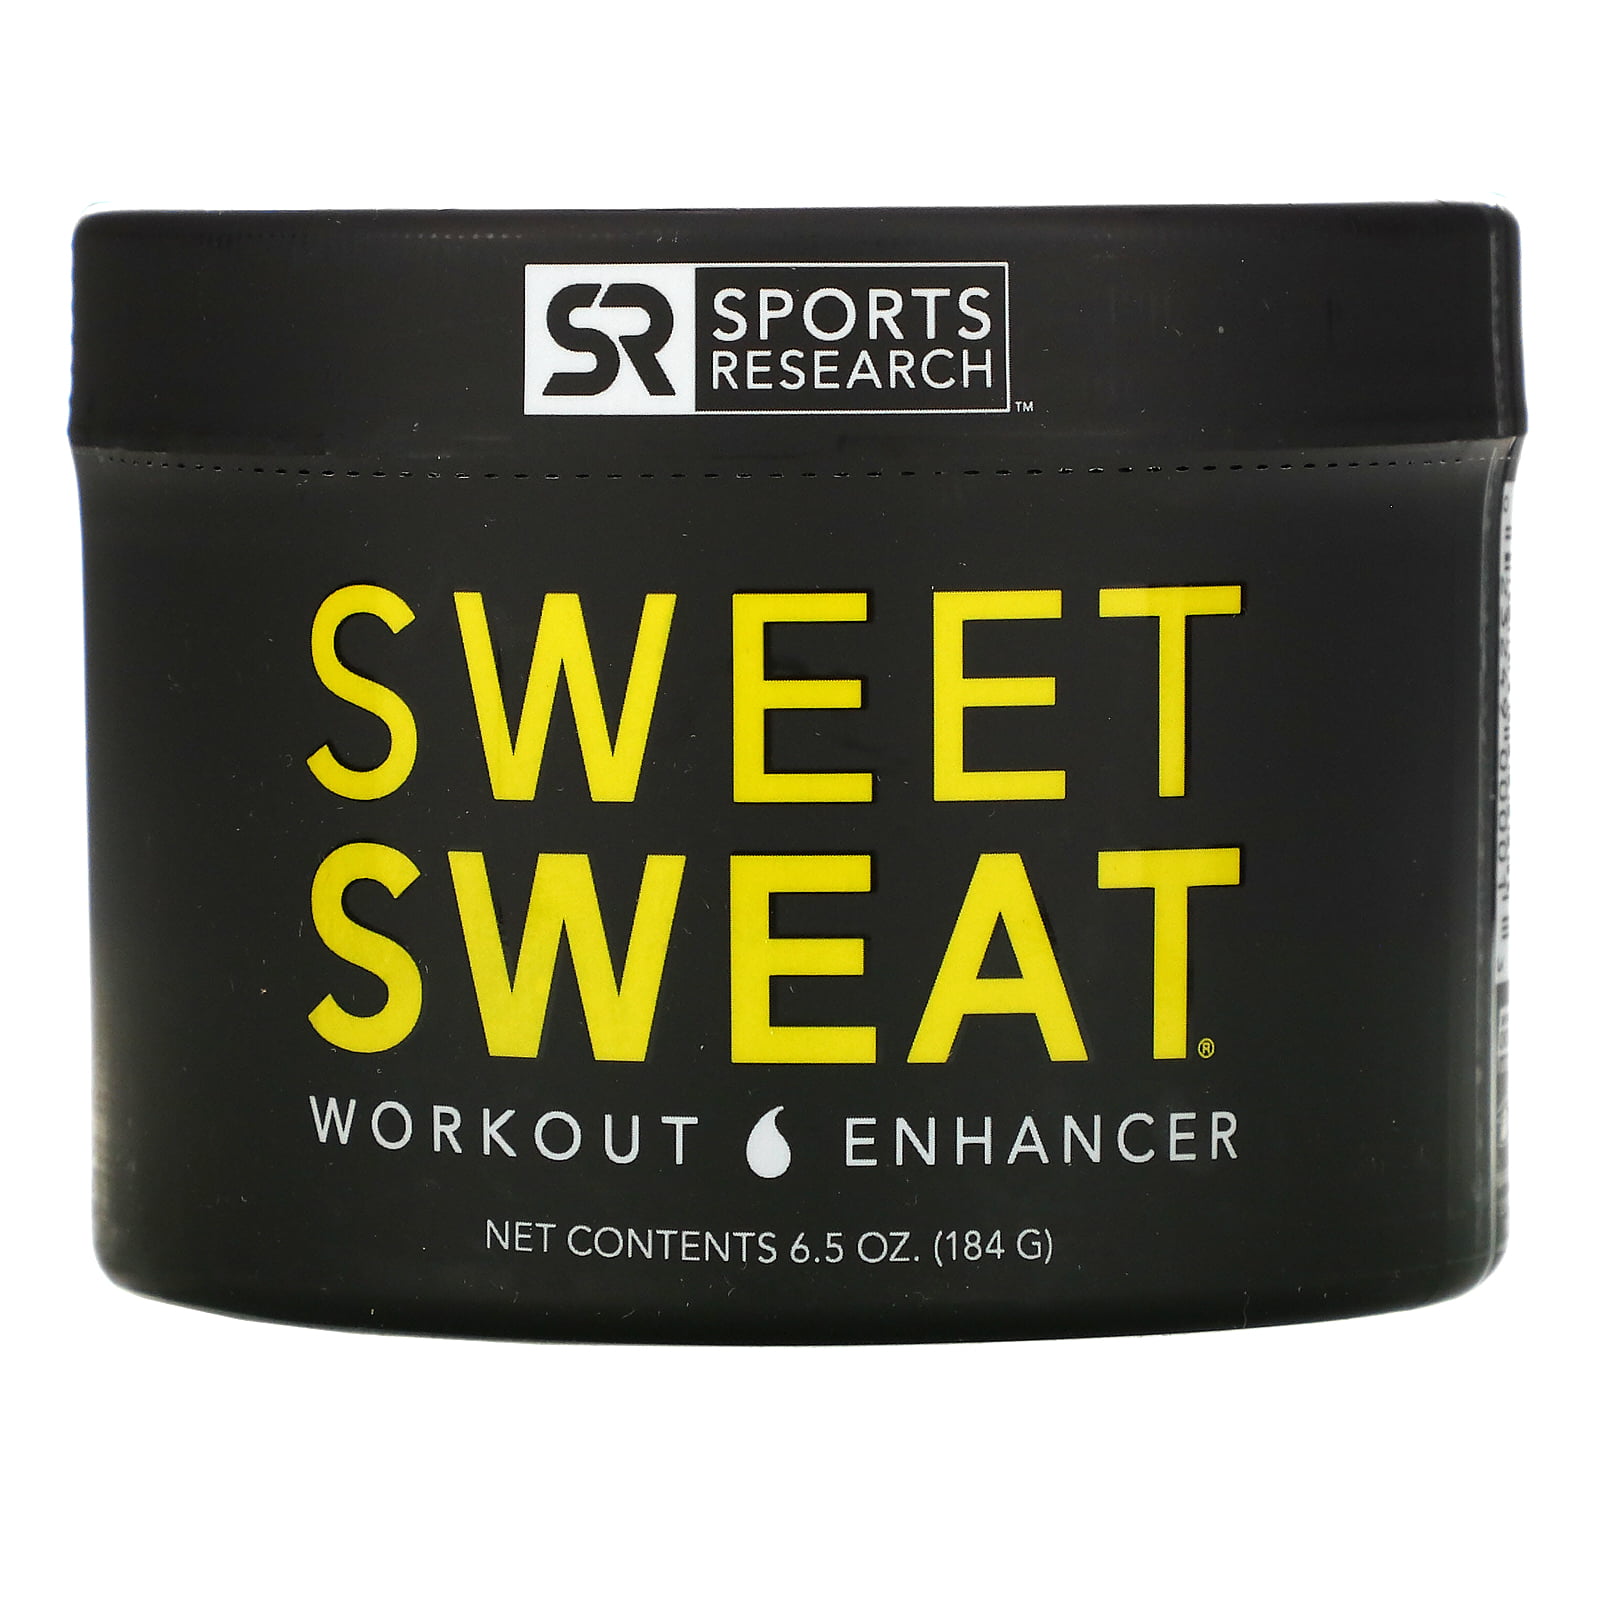 5, 10, 15, 20 & 25 lbs Sweet Sweat Resistance Training Bands ~ Includes Free Sweet Sweat Sample and Carrying Bag ~ 75lbs of Total Resistance!